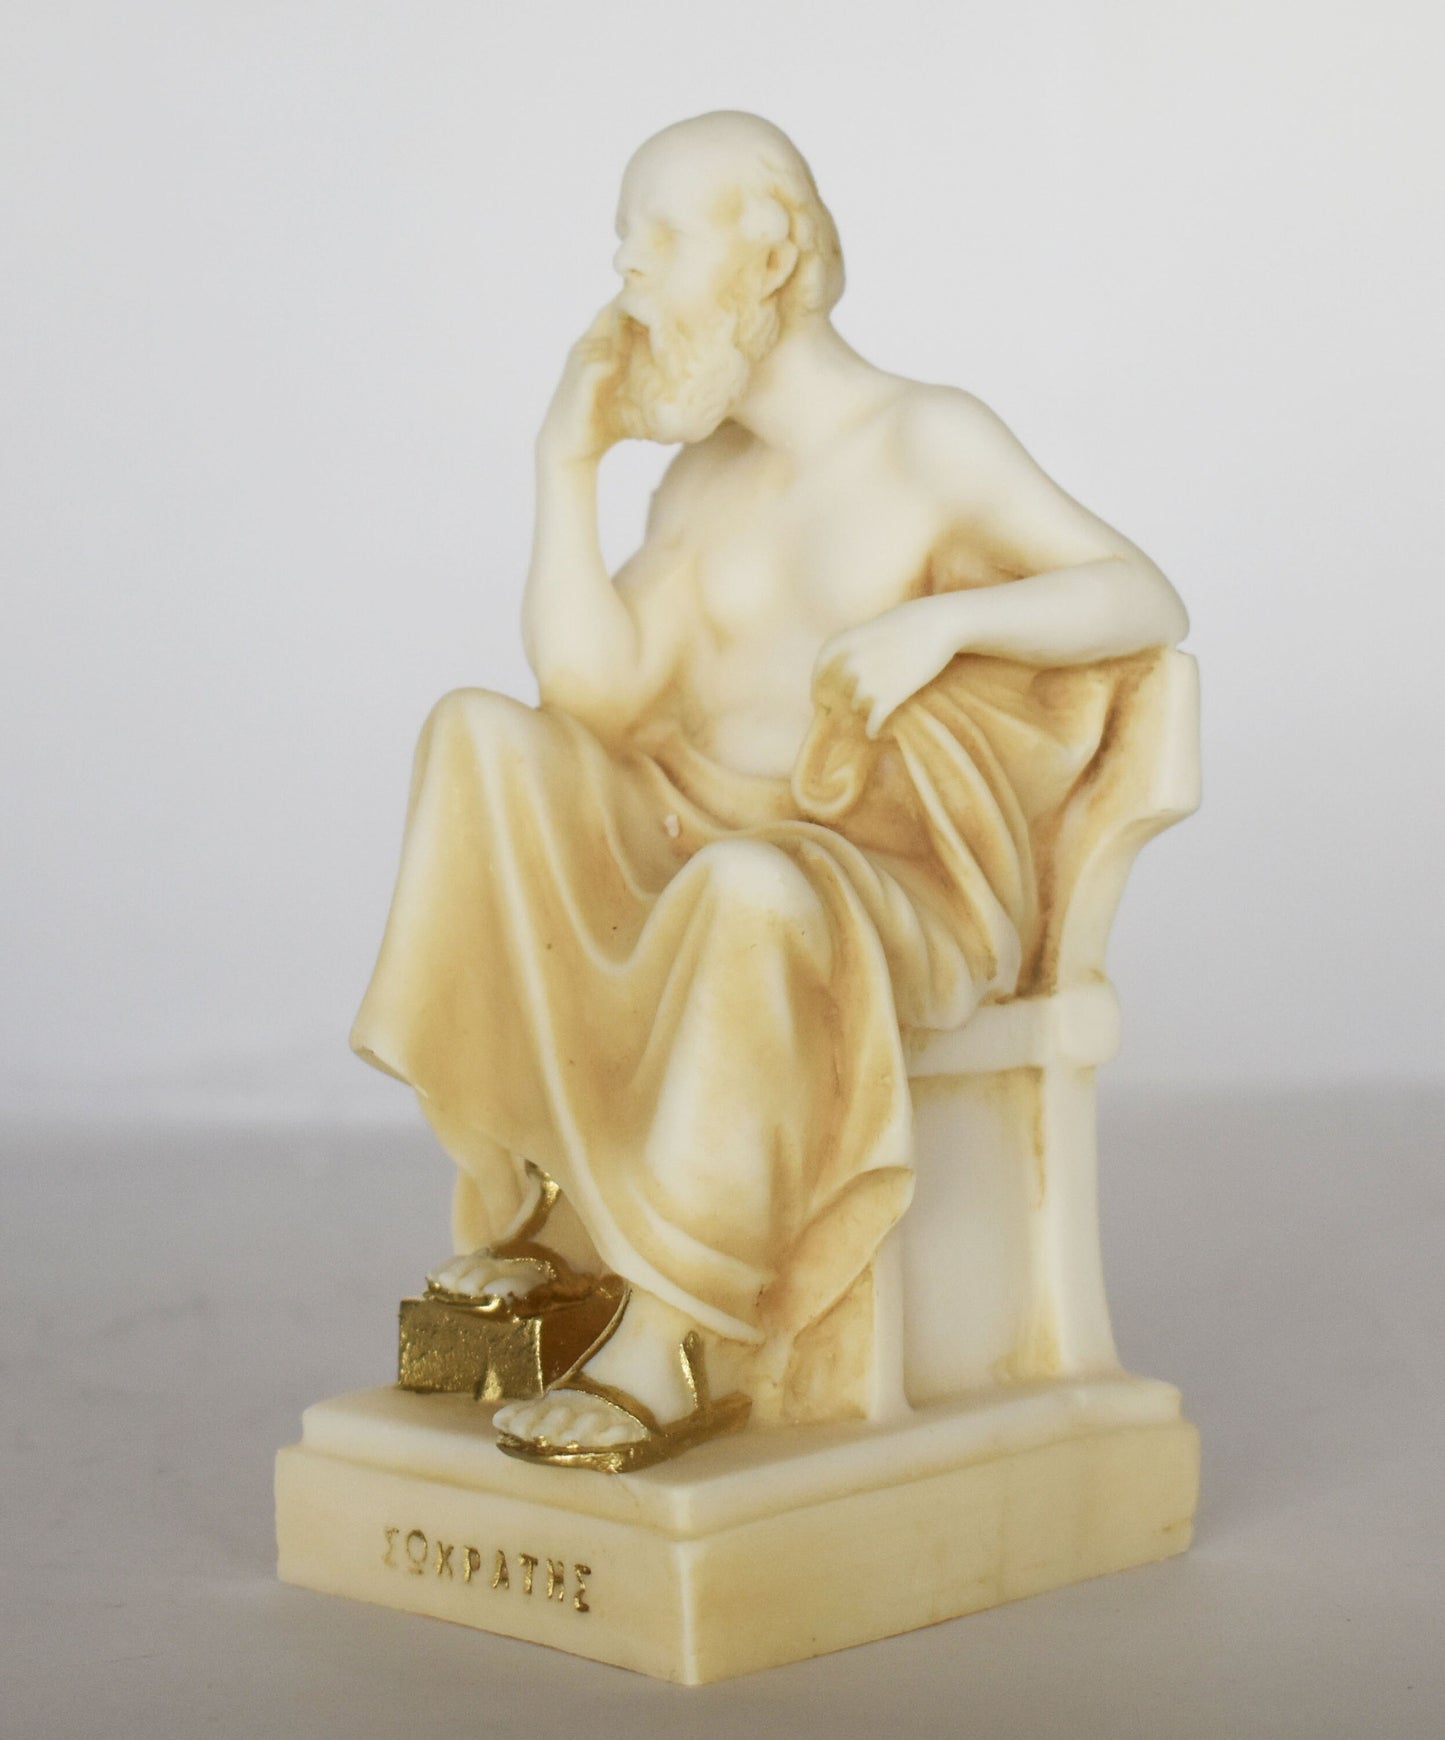 Socrates  - Ancient Greece -  Father of Western Philosophy, Teacher of  Plato - Aged Alabaster Sculpture